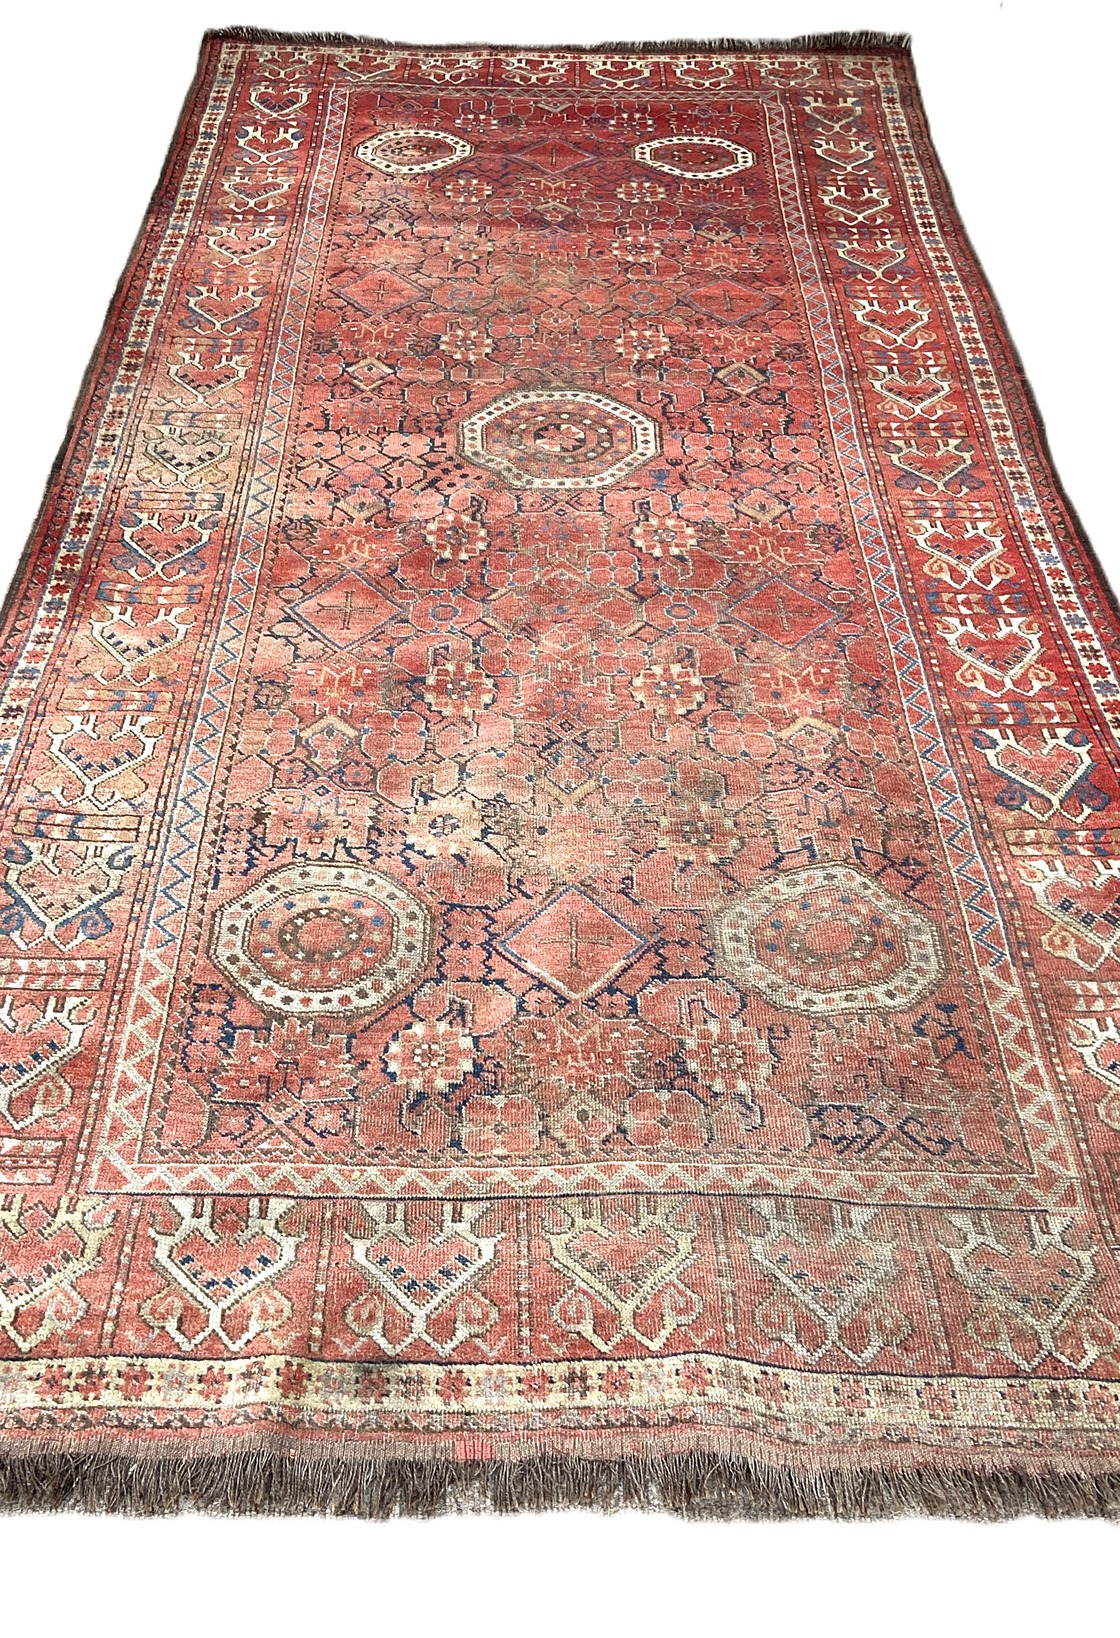 An interesting Beshir Kelleh carpet, probably Turkmenistan, circa 1900, the central field with